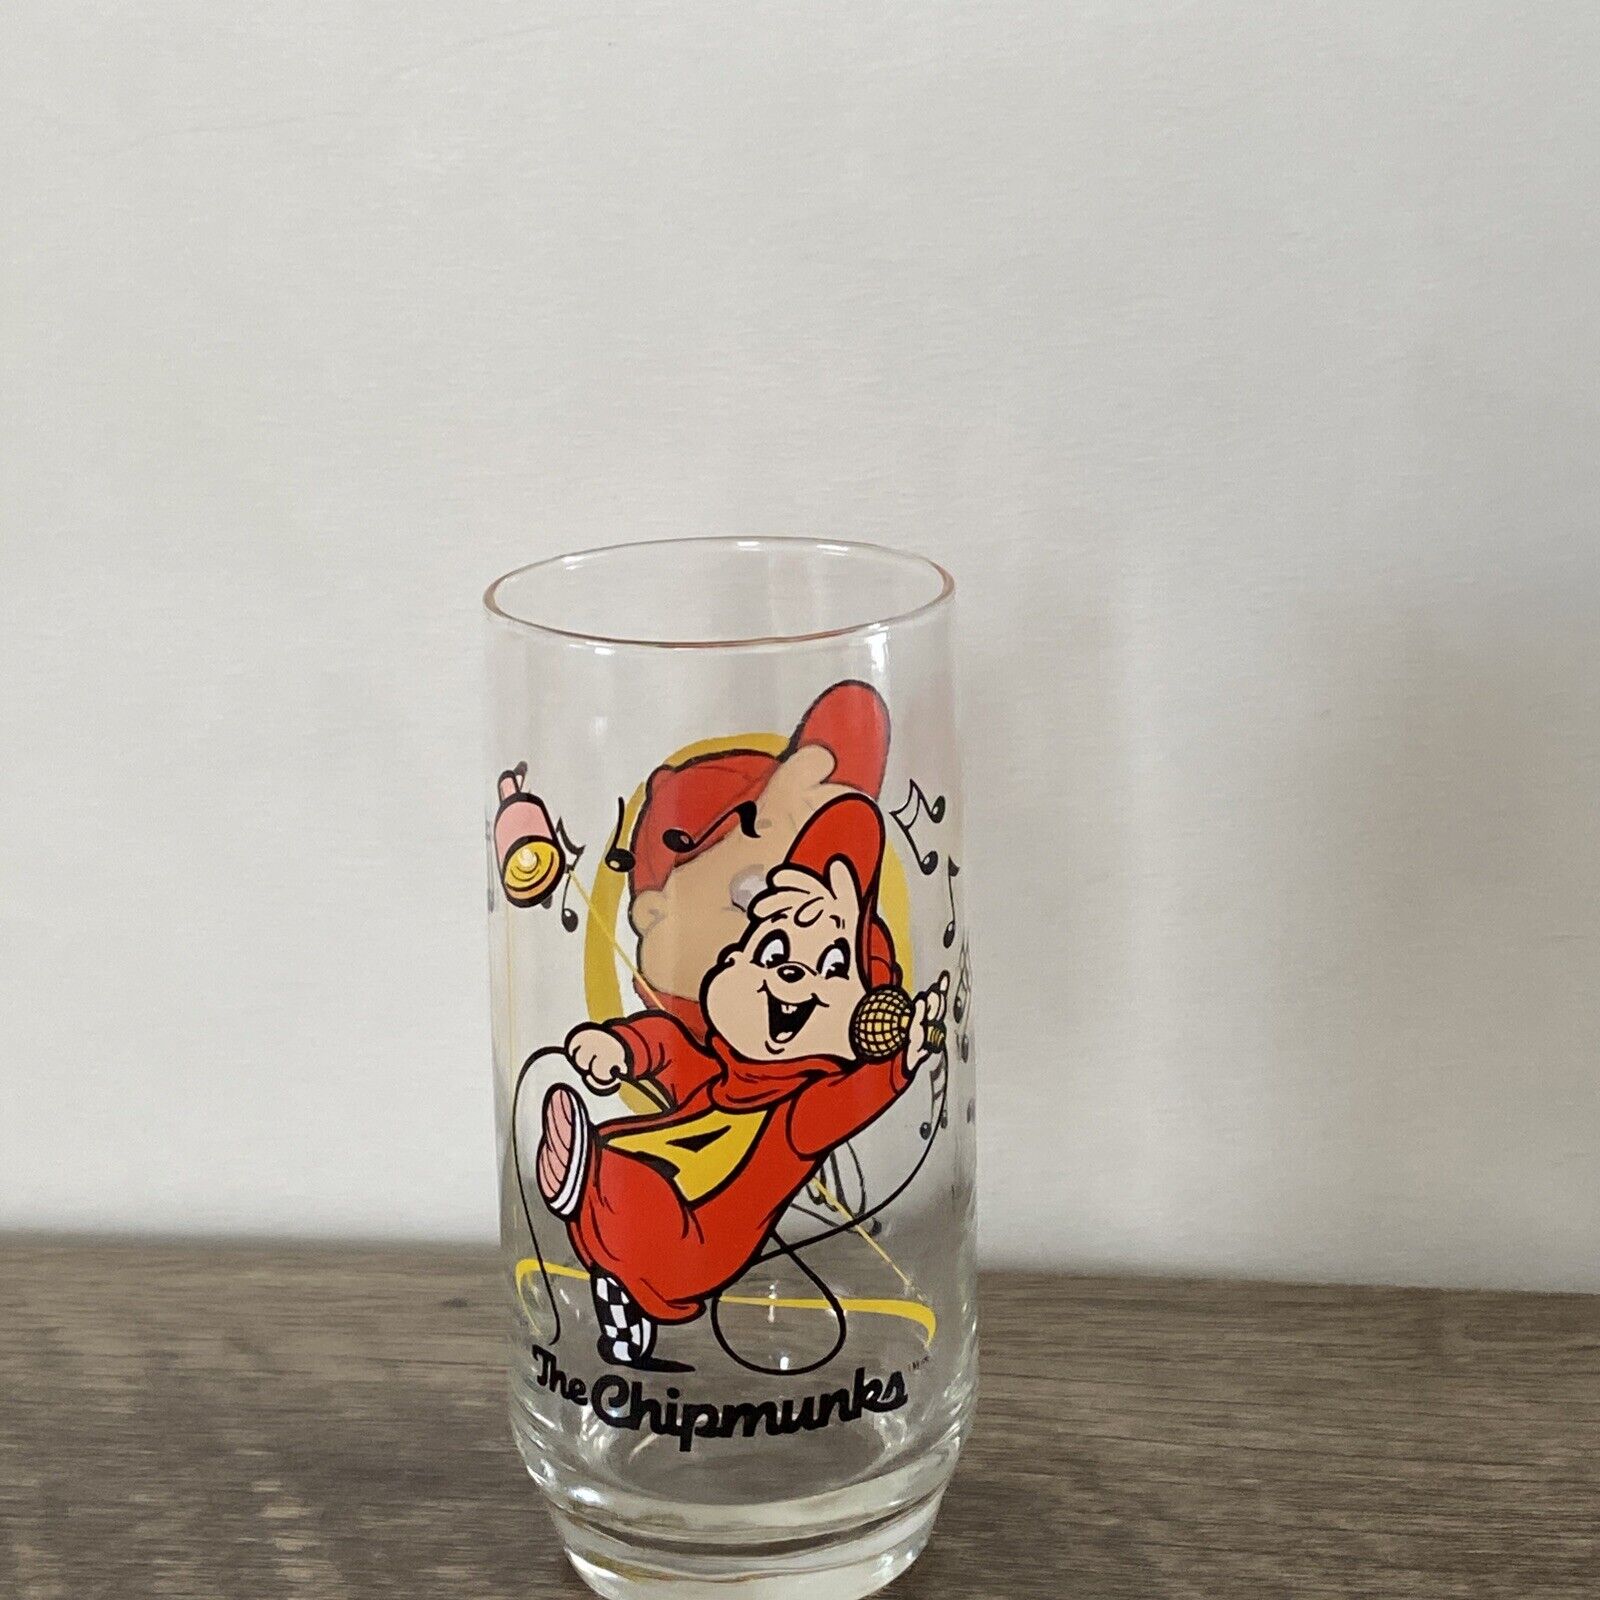 1985 Vintage Alvin and the Chipmunks glass Bagdasarian Hardee\'s promo Alvin